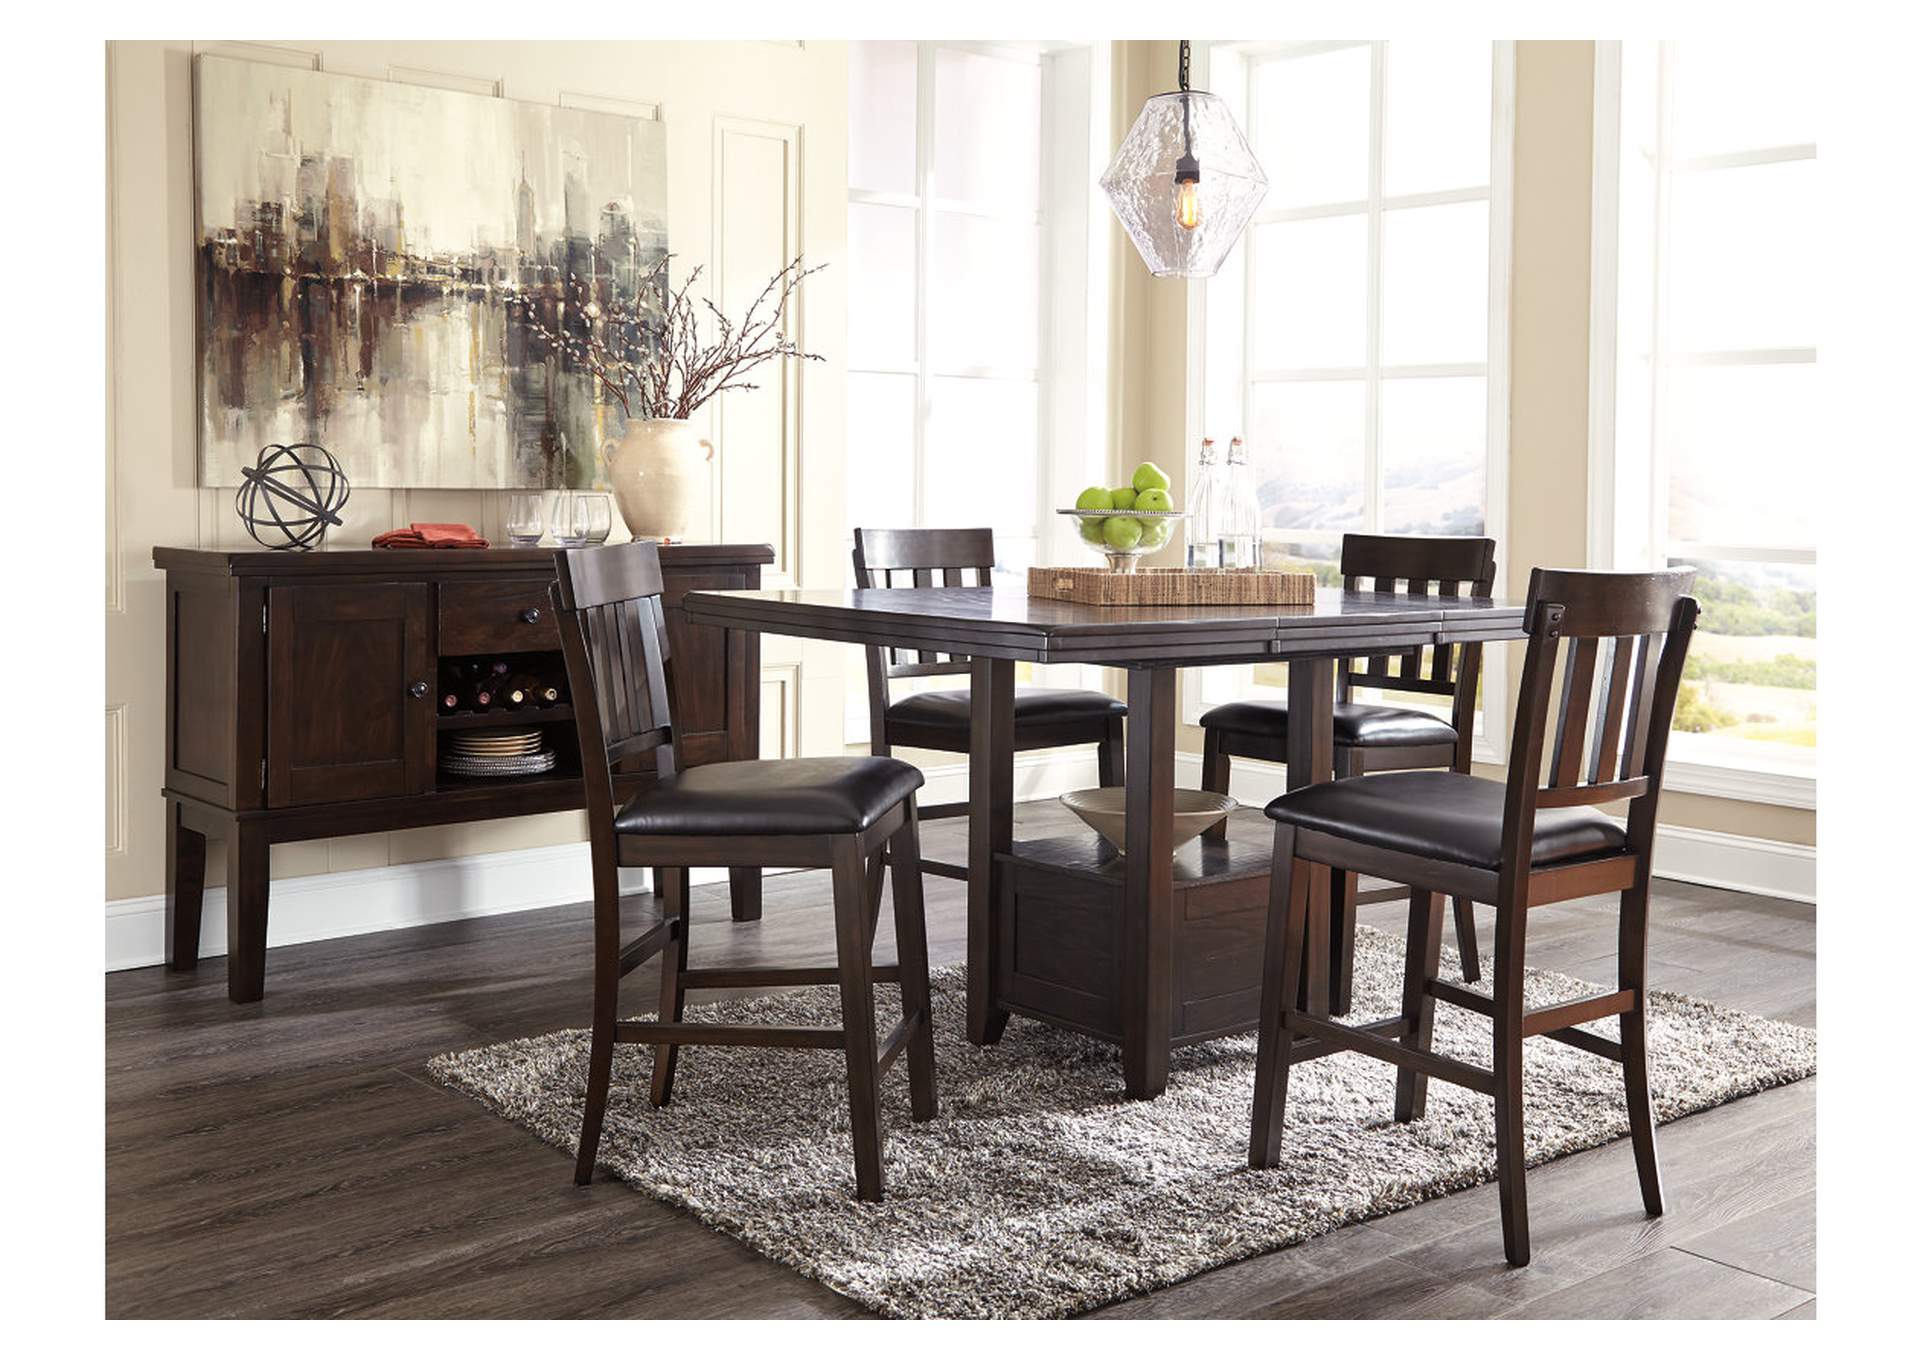 Haddigan Counter Height Dining Table, 4 Barstools and Server,Signature Design By Ashley